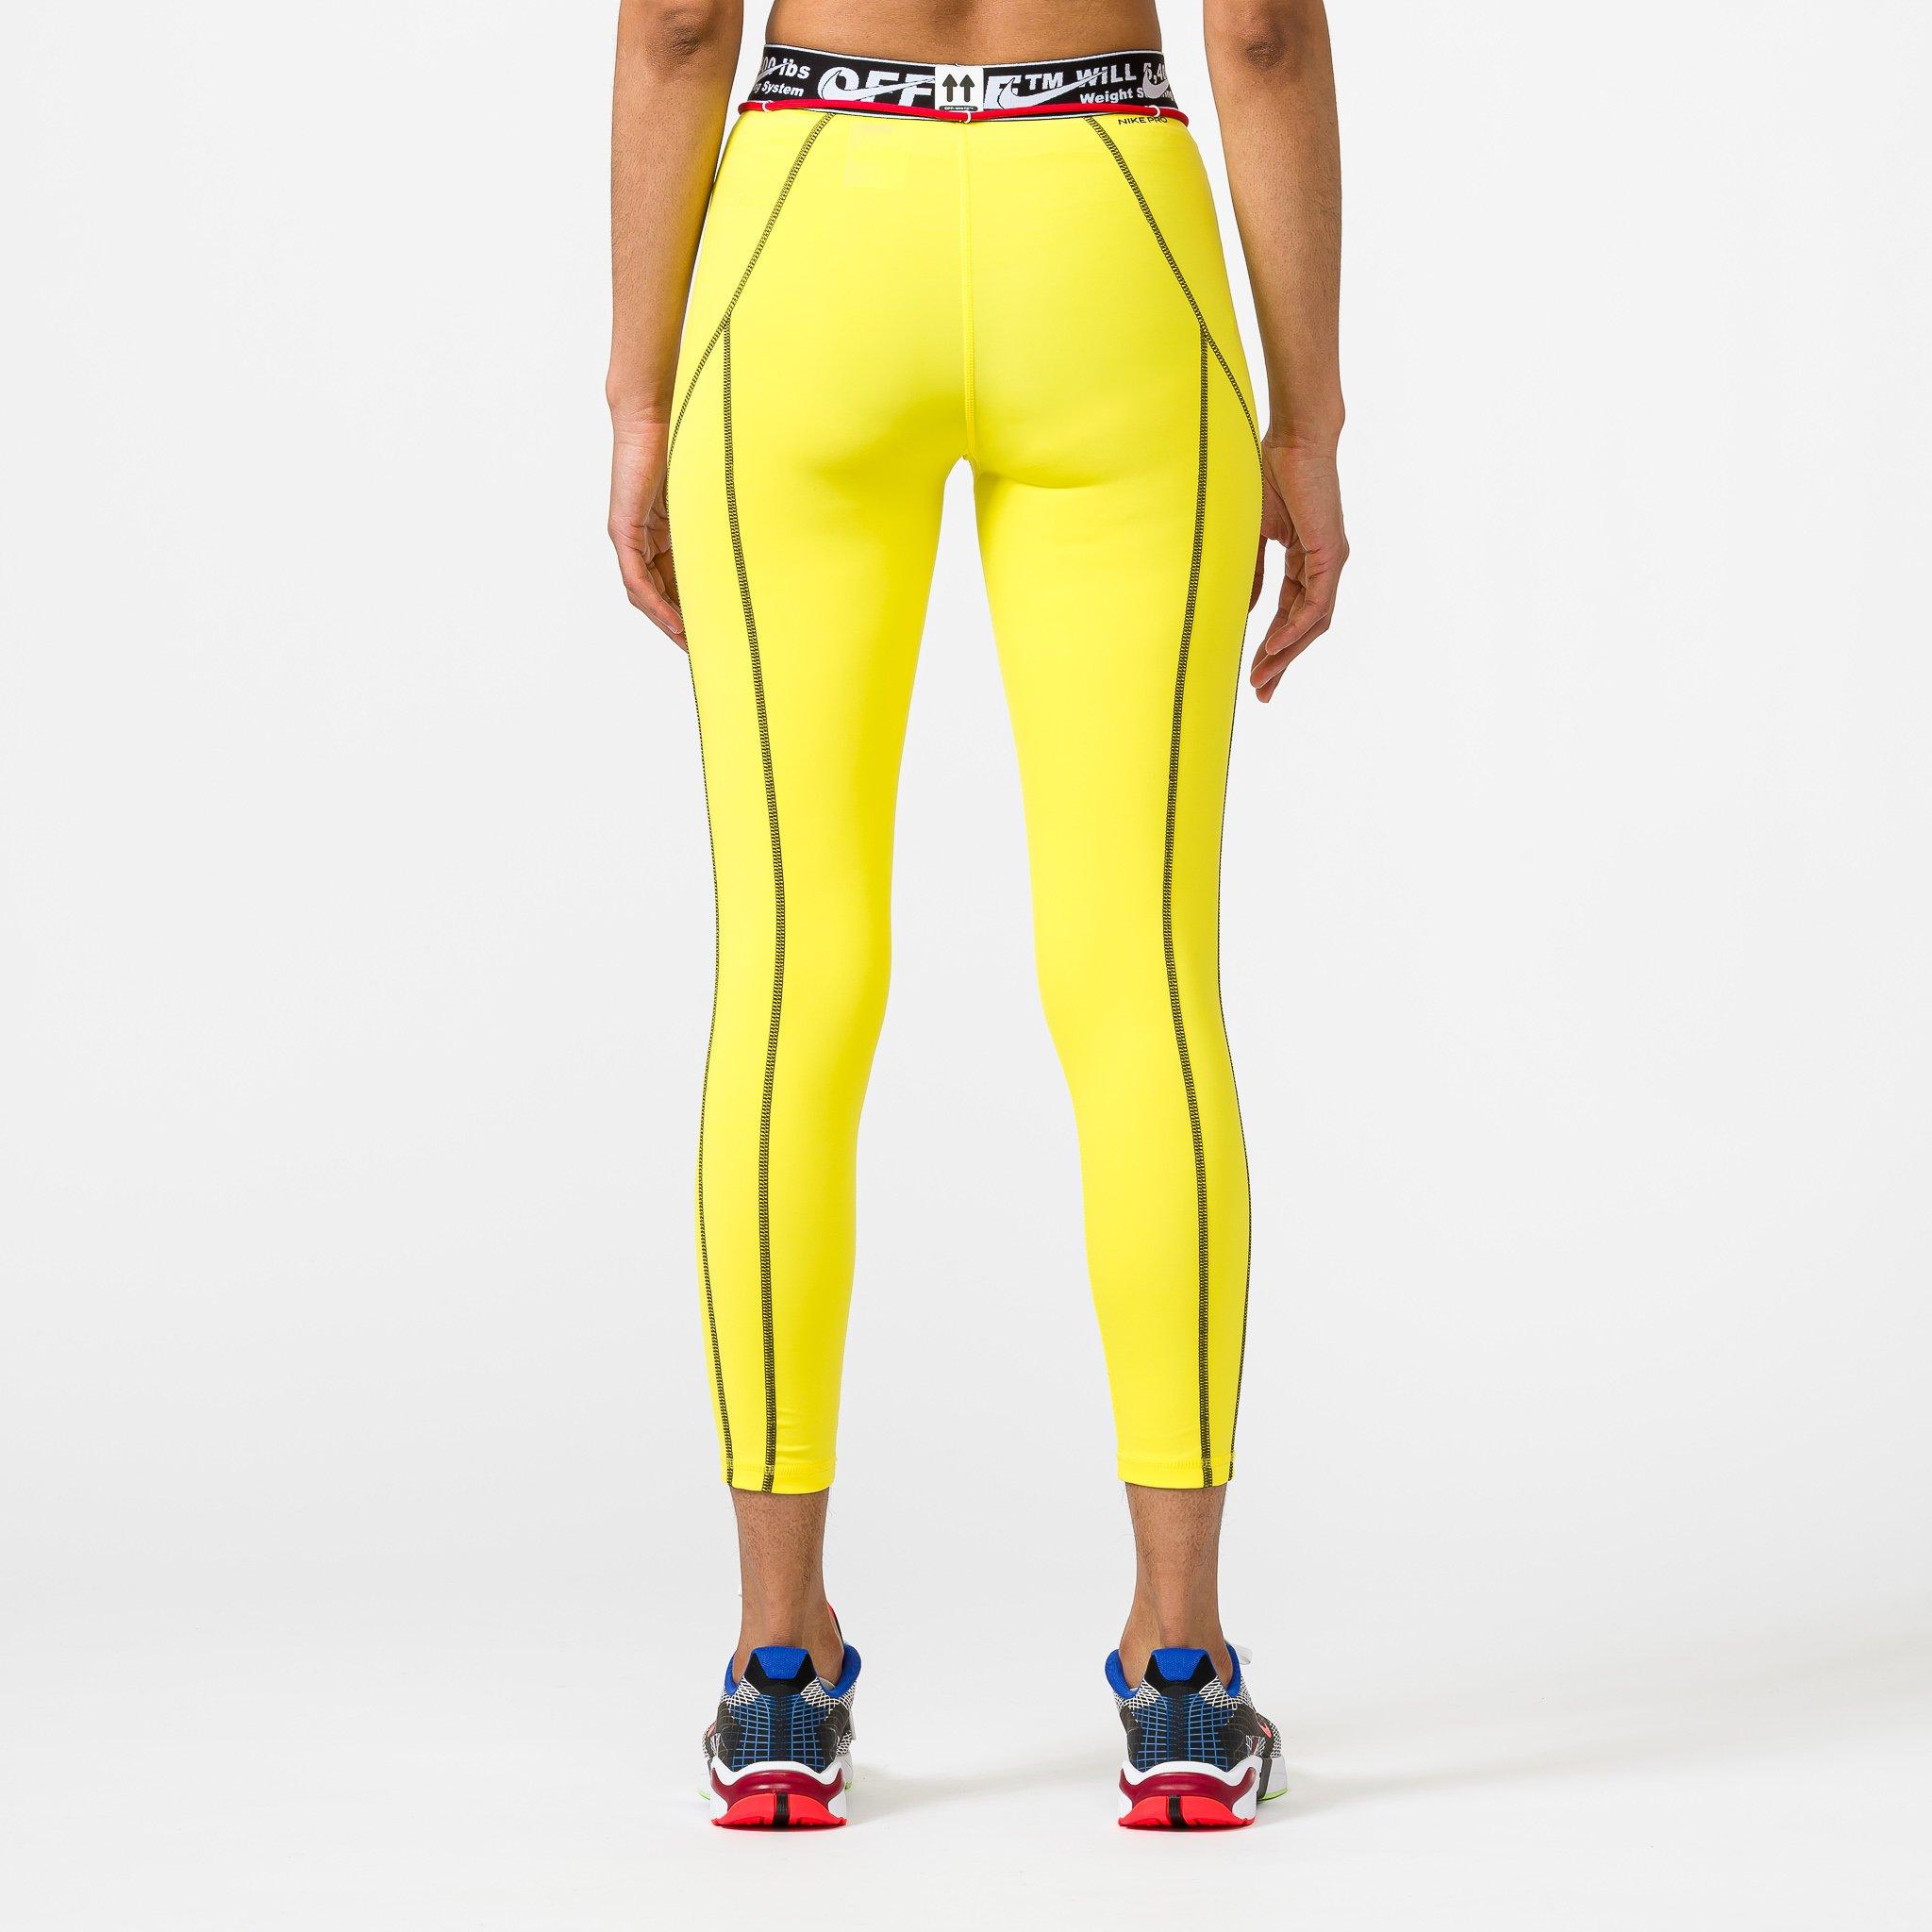 Nike Synthetic Off-white X Women's Nrg Pro Tights in Yellow | Lyst